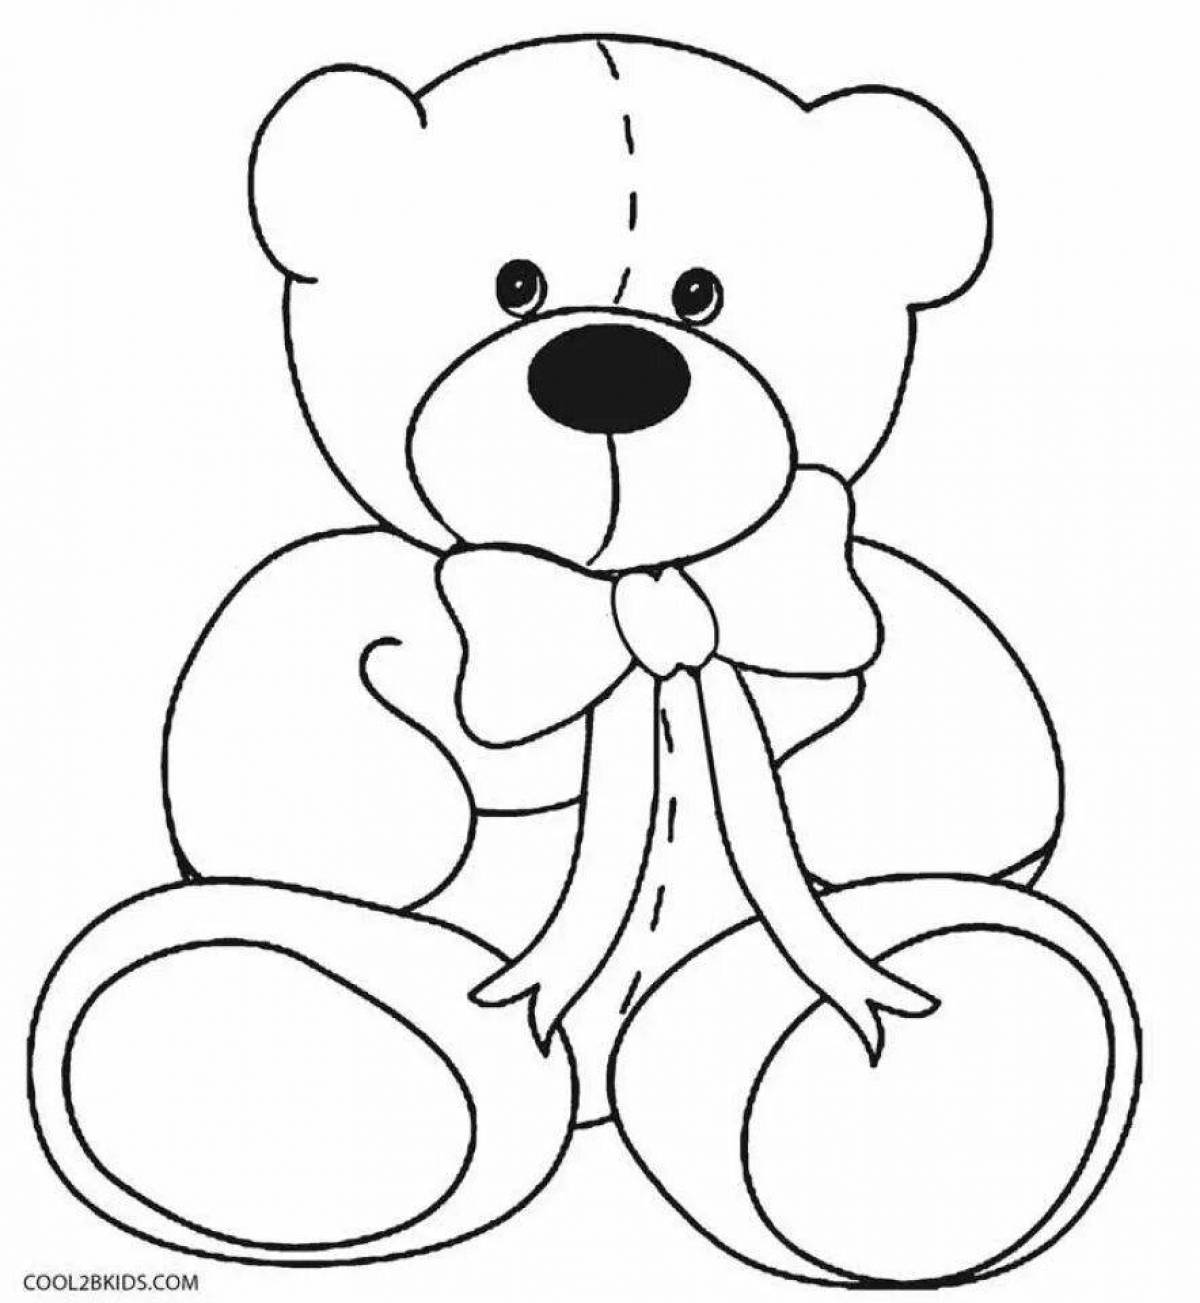 Coloring soft toy bear